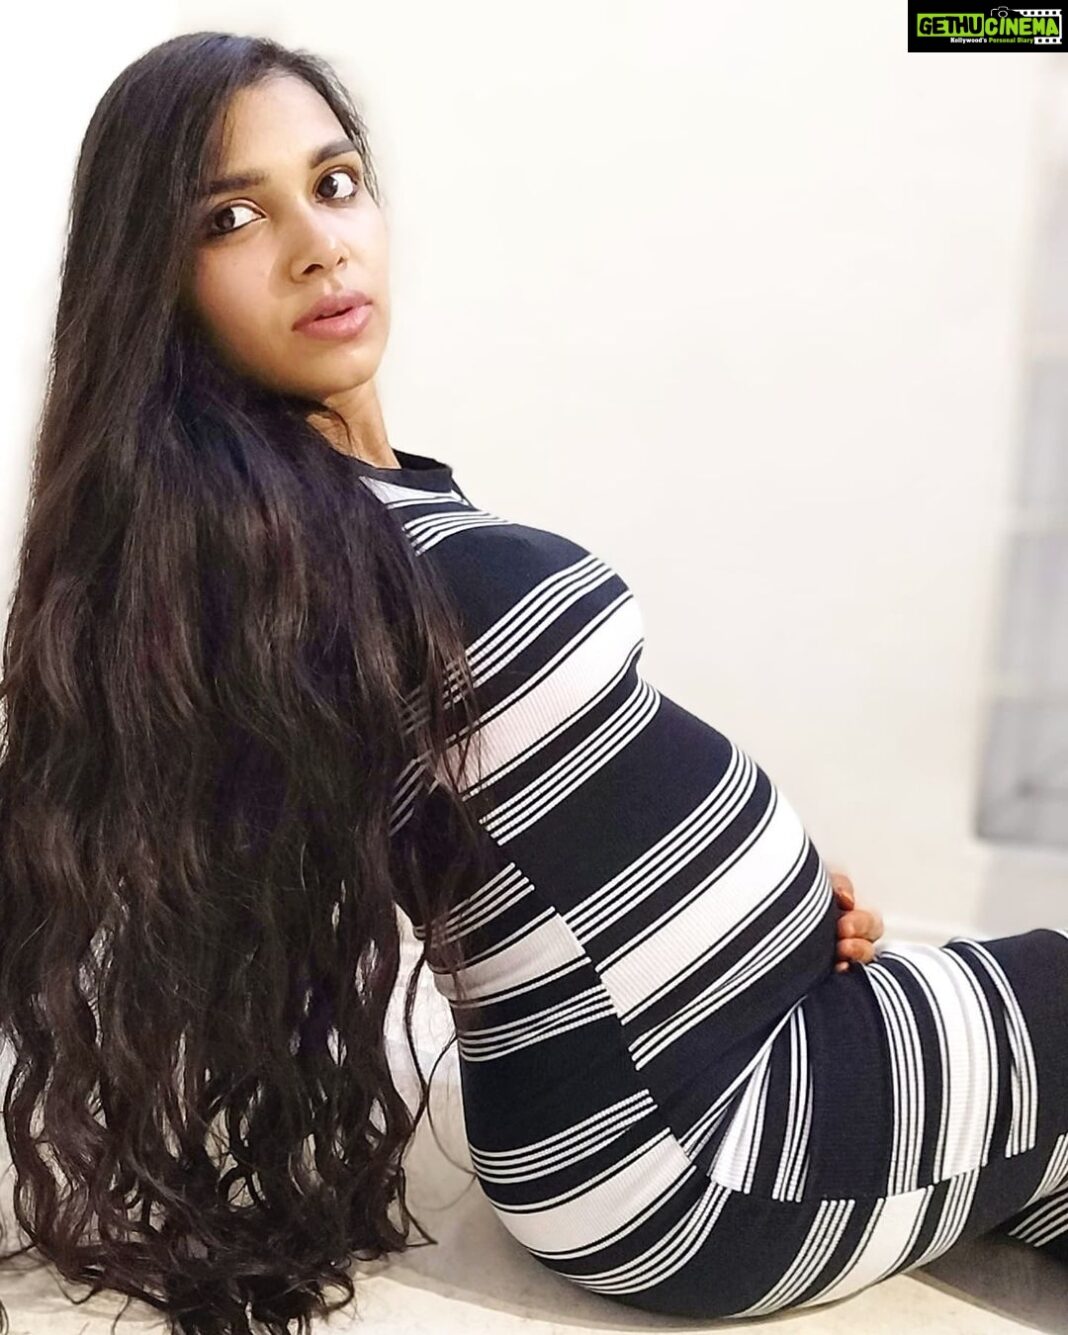 M.M. Manasi Instagram - Last year this day ❤️ What happens when you are pregnant, there is a lockdown, you can't step out and you still want to do photoshoots ... You do them at home.. in your room... My baby @monisshamm always making anything and everything possible for me❣️😘🤗 Dress courtesy my bumlooo @sanjanakonduru ❣️ What do you guys think... How did it turn out?? #lastyeartoday #pregnancydiaries #PreSwaraEra #5monthspregnant #homephotoshoot #bump #preggobelly #preggolife